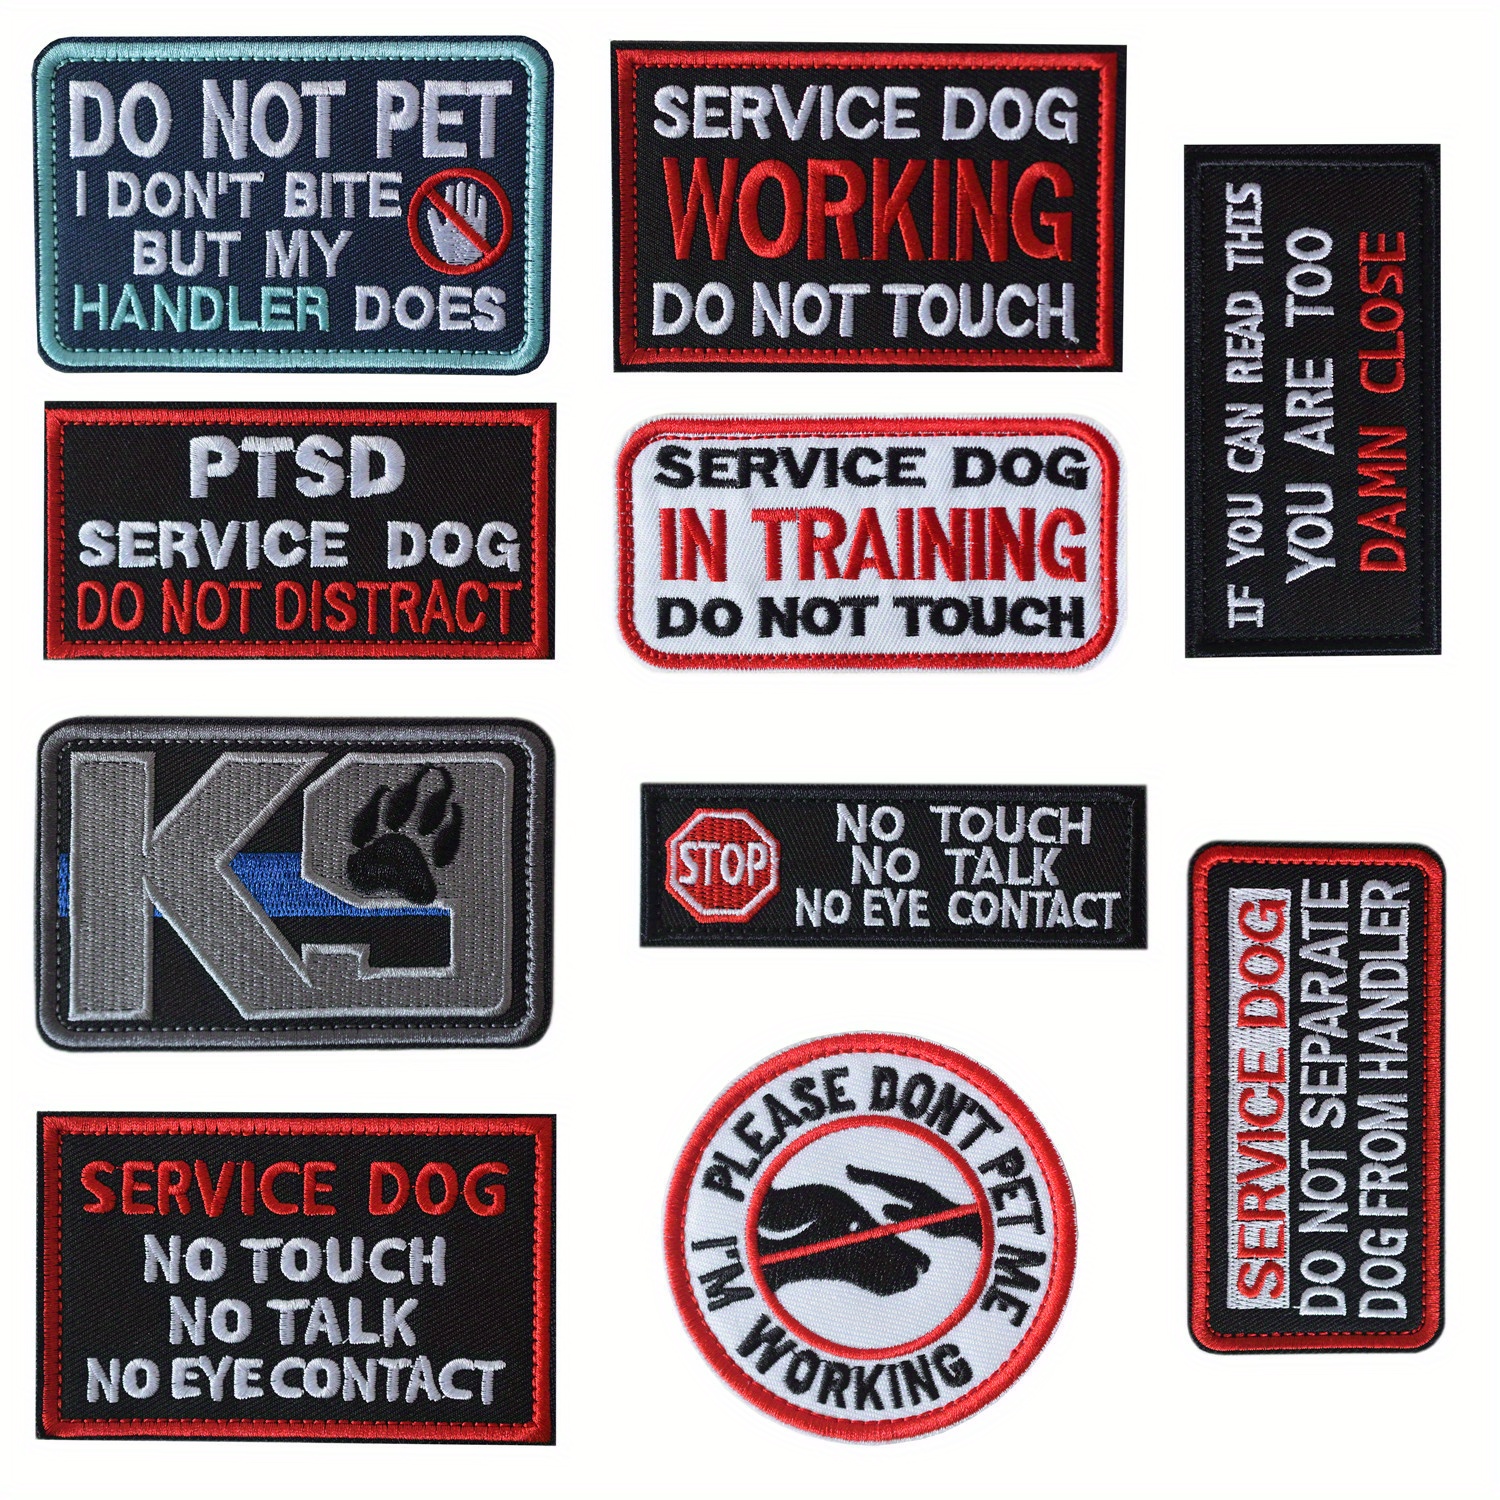 Buy Service Dog Working Training Embroidered Patches Military